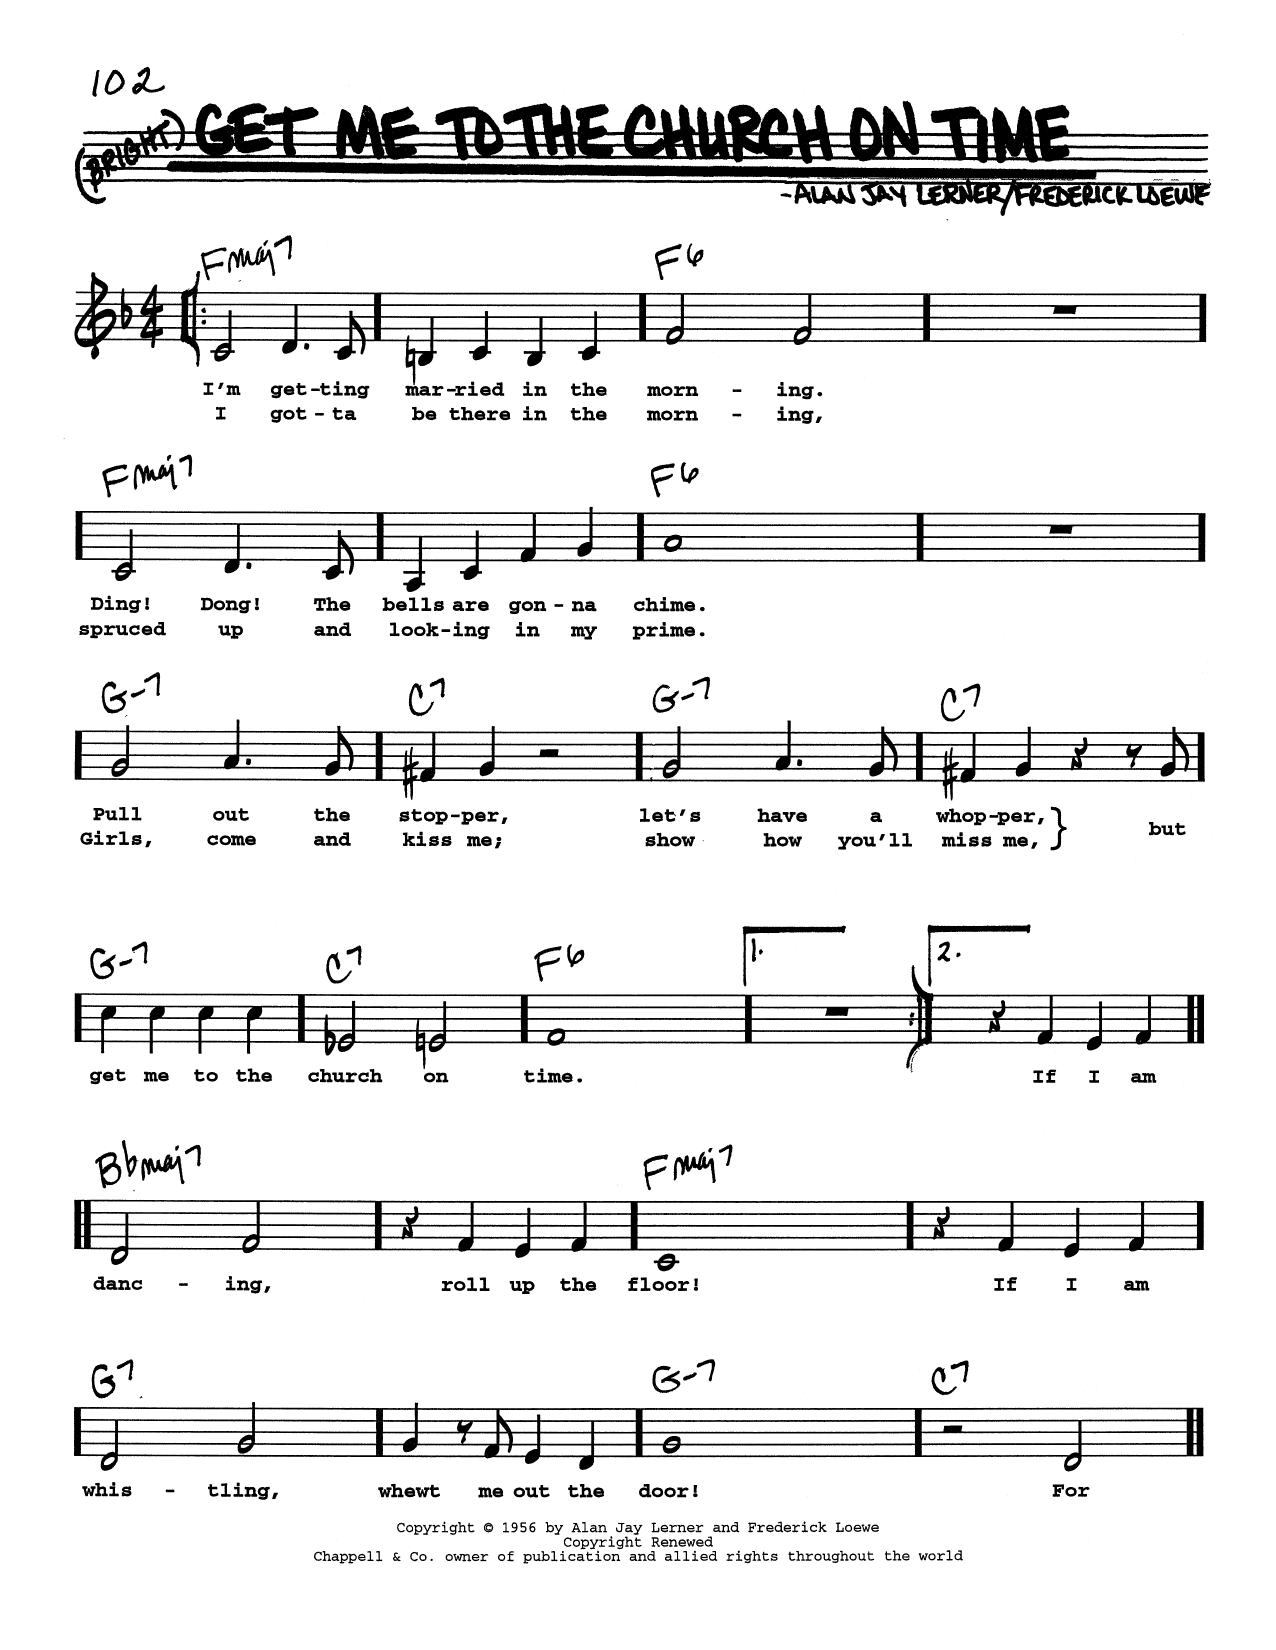 Lerner & Loewe Get Me To The Church On Time (Low Voice) sheet music notes printable PDF score